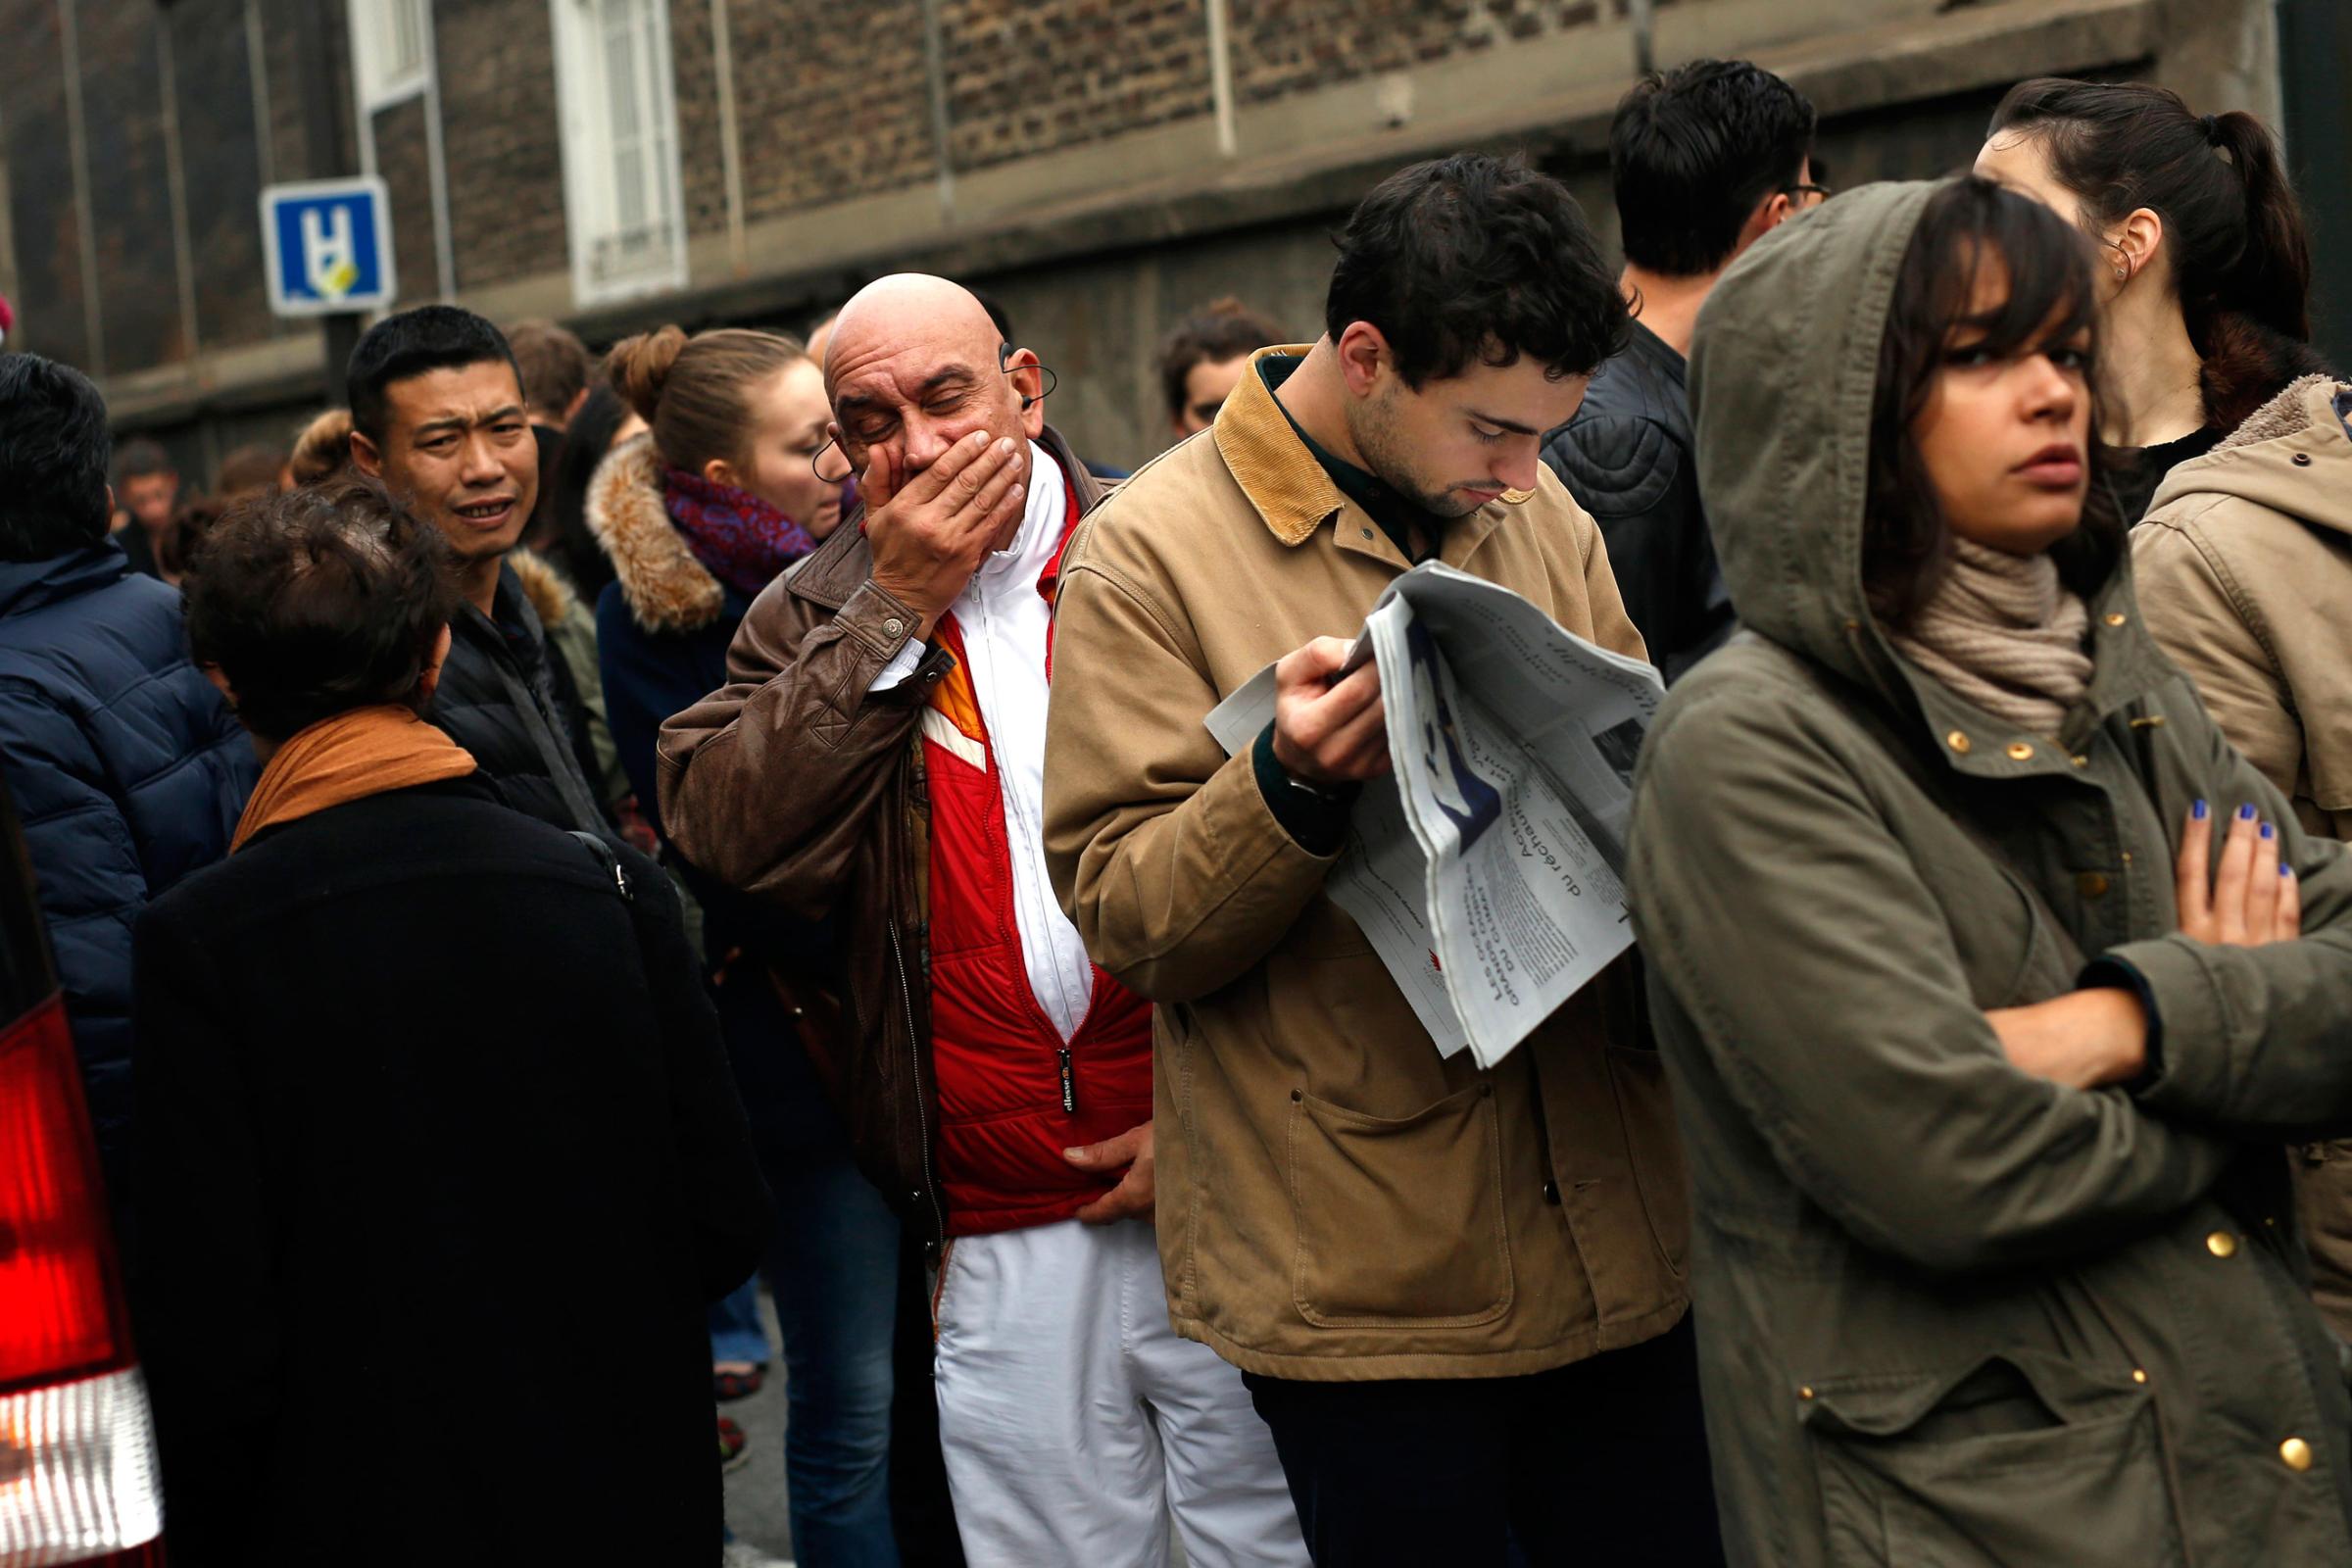 People line up to give blood at the St Louis hospital across the street from the Petit Cambodge restaurant in Paris on Nov. 14, 2015.